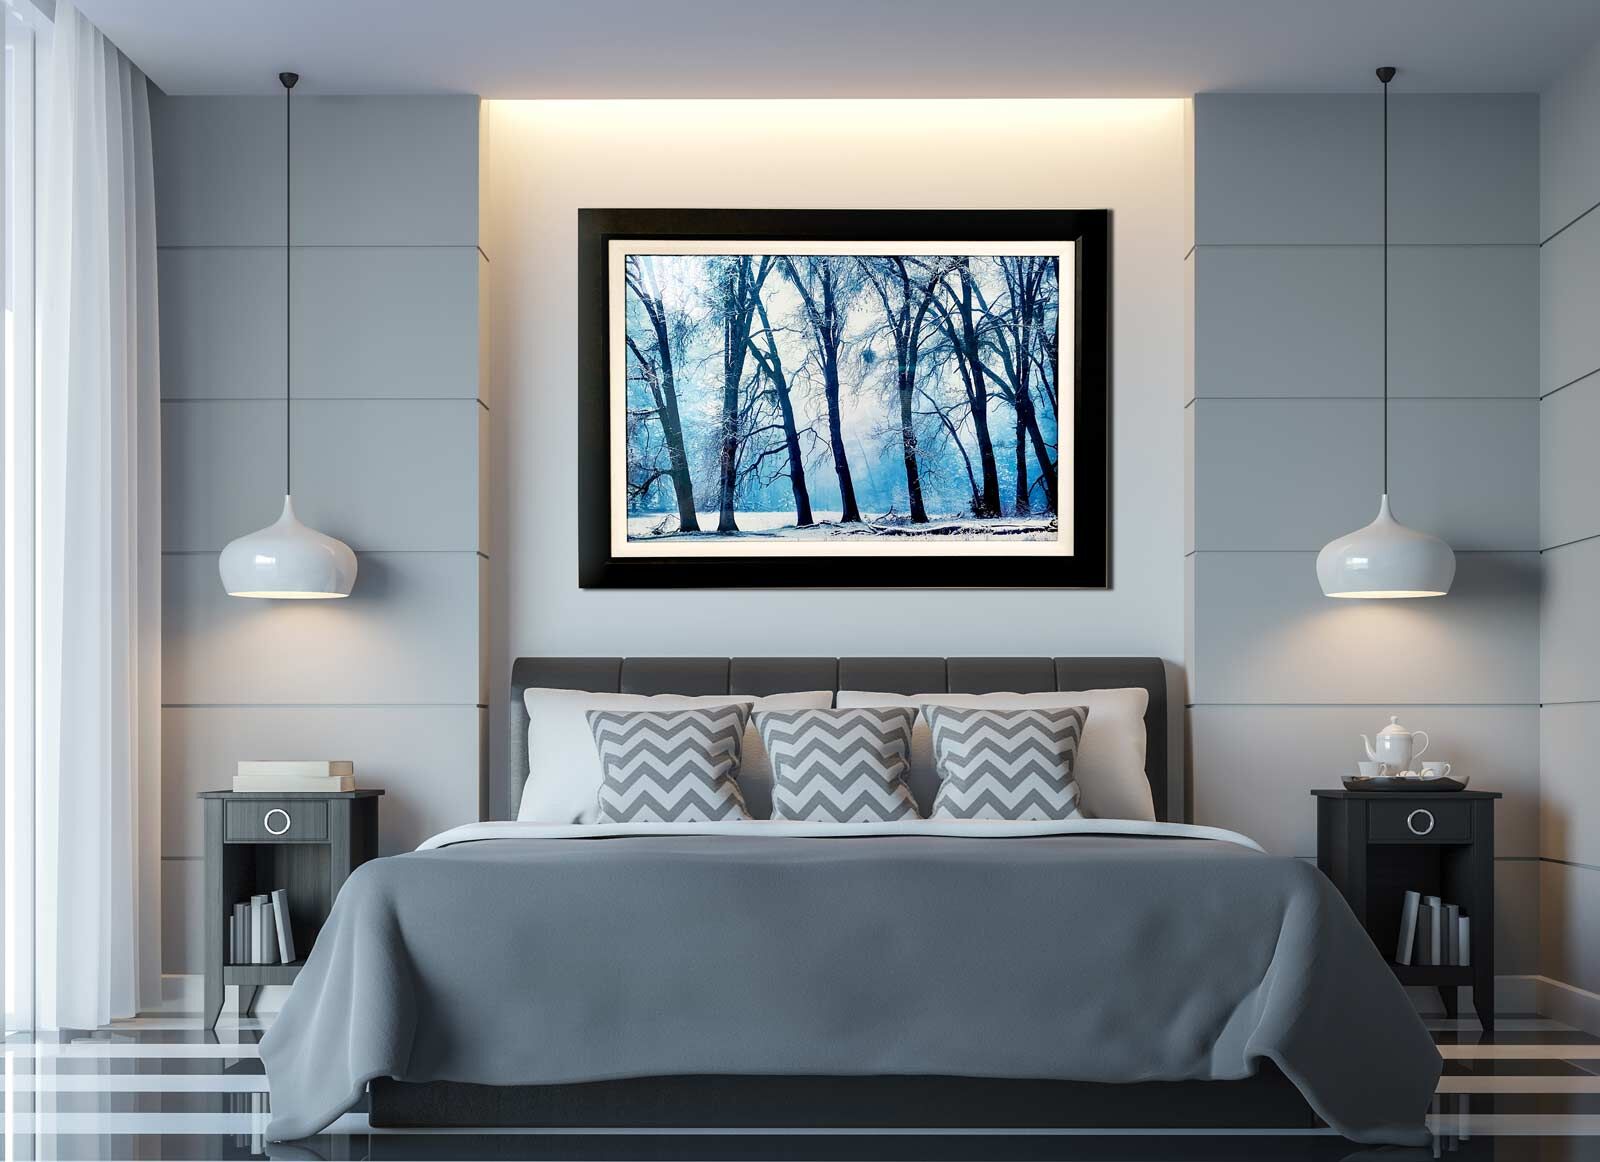 Bedroom Decoration By Wall Art